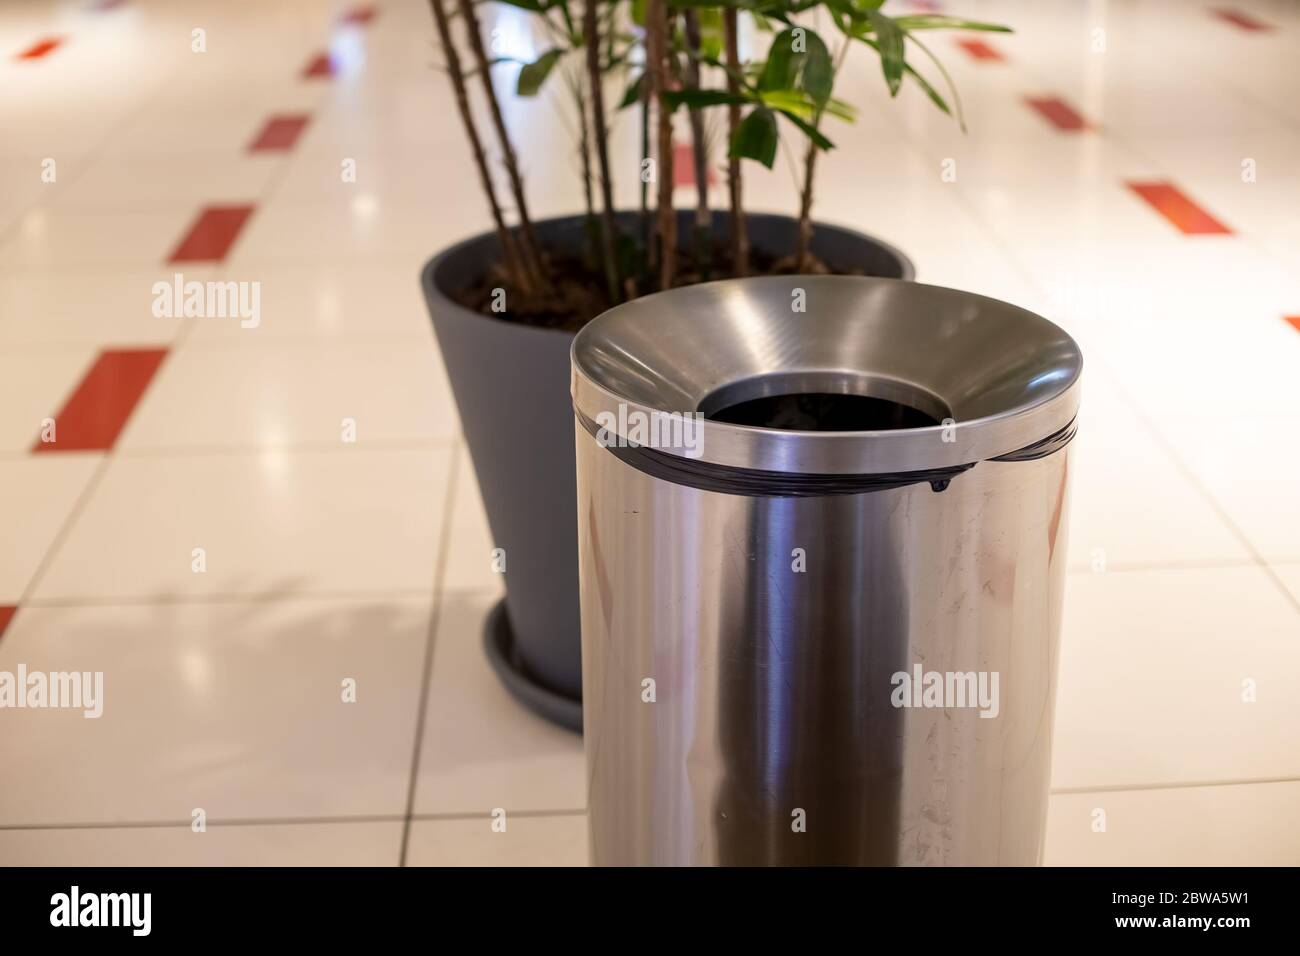 close-up steel cylinder bin litter bin. near in blur a plant in a gray tub. Against the background of a light floor tile with red lines in blur Stock Photo